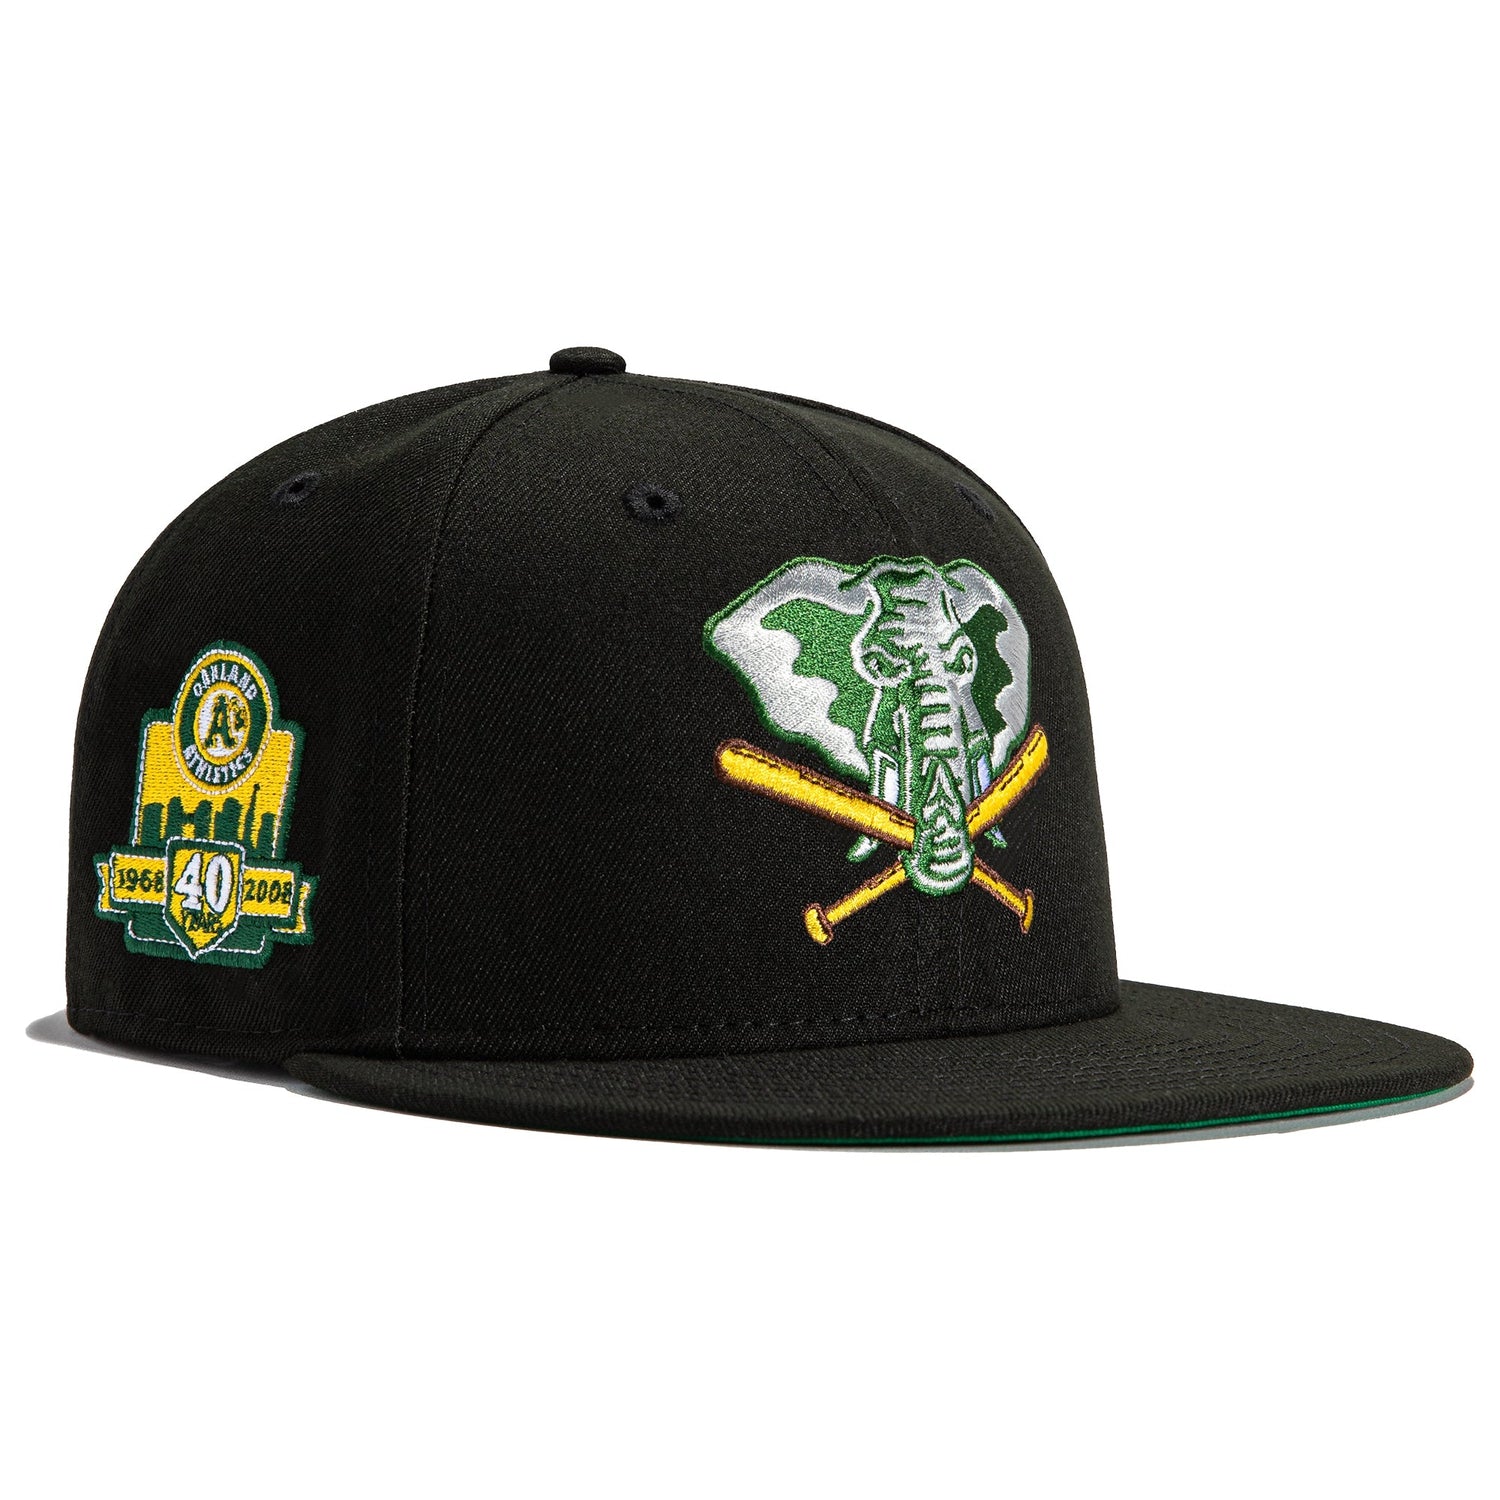 NEW ERA MARKSMAN STOMPER OAKLAND A'S FITTED HAT (RIFLE GREEN